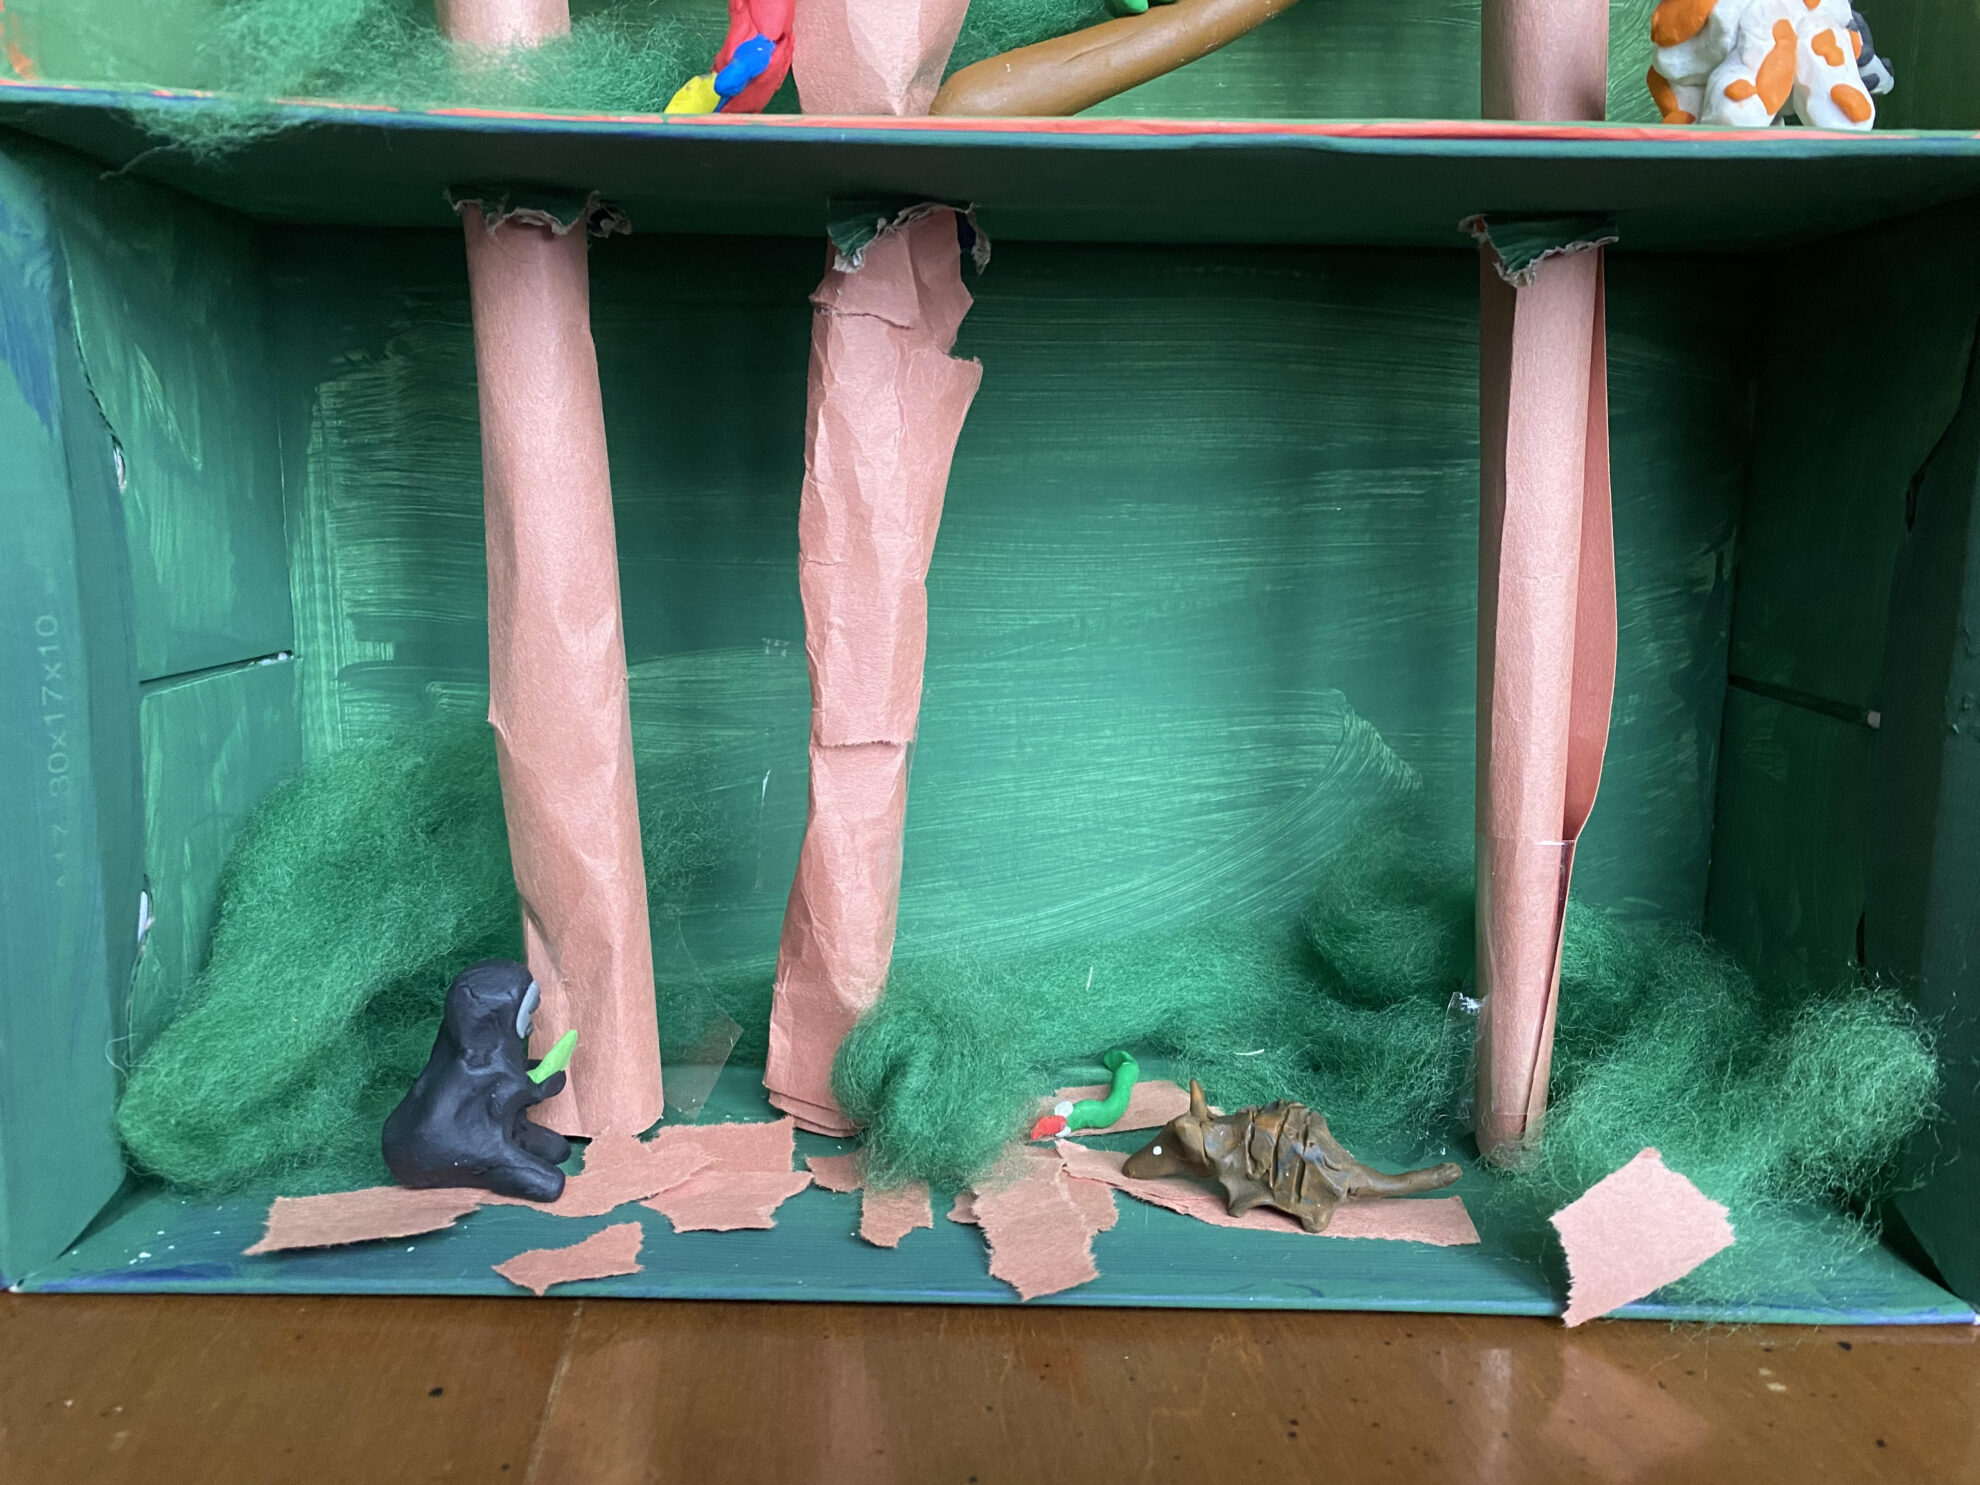 Rainforest Family Unit Study Diorama - The Forest Floor